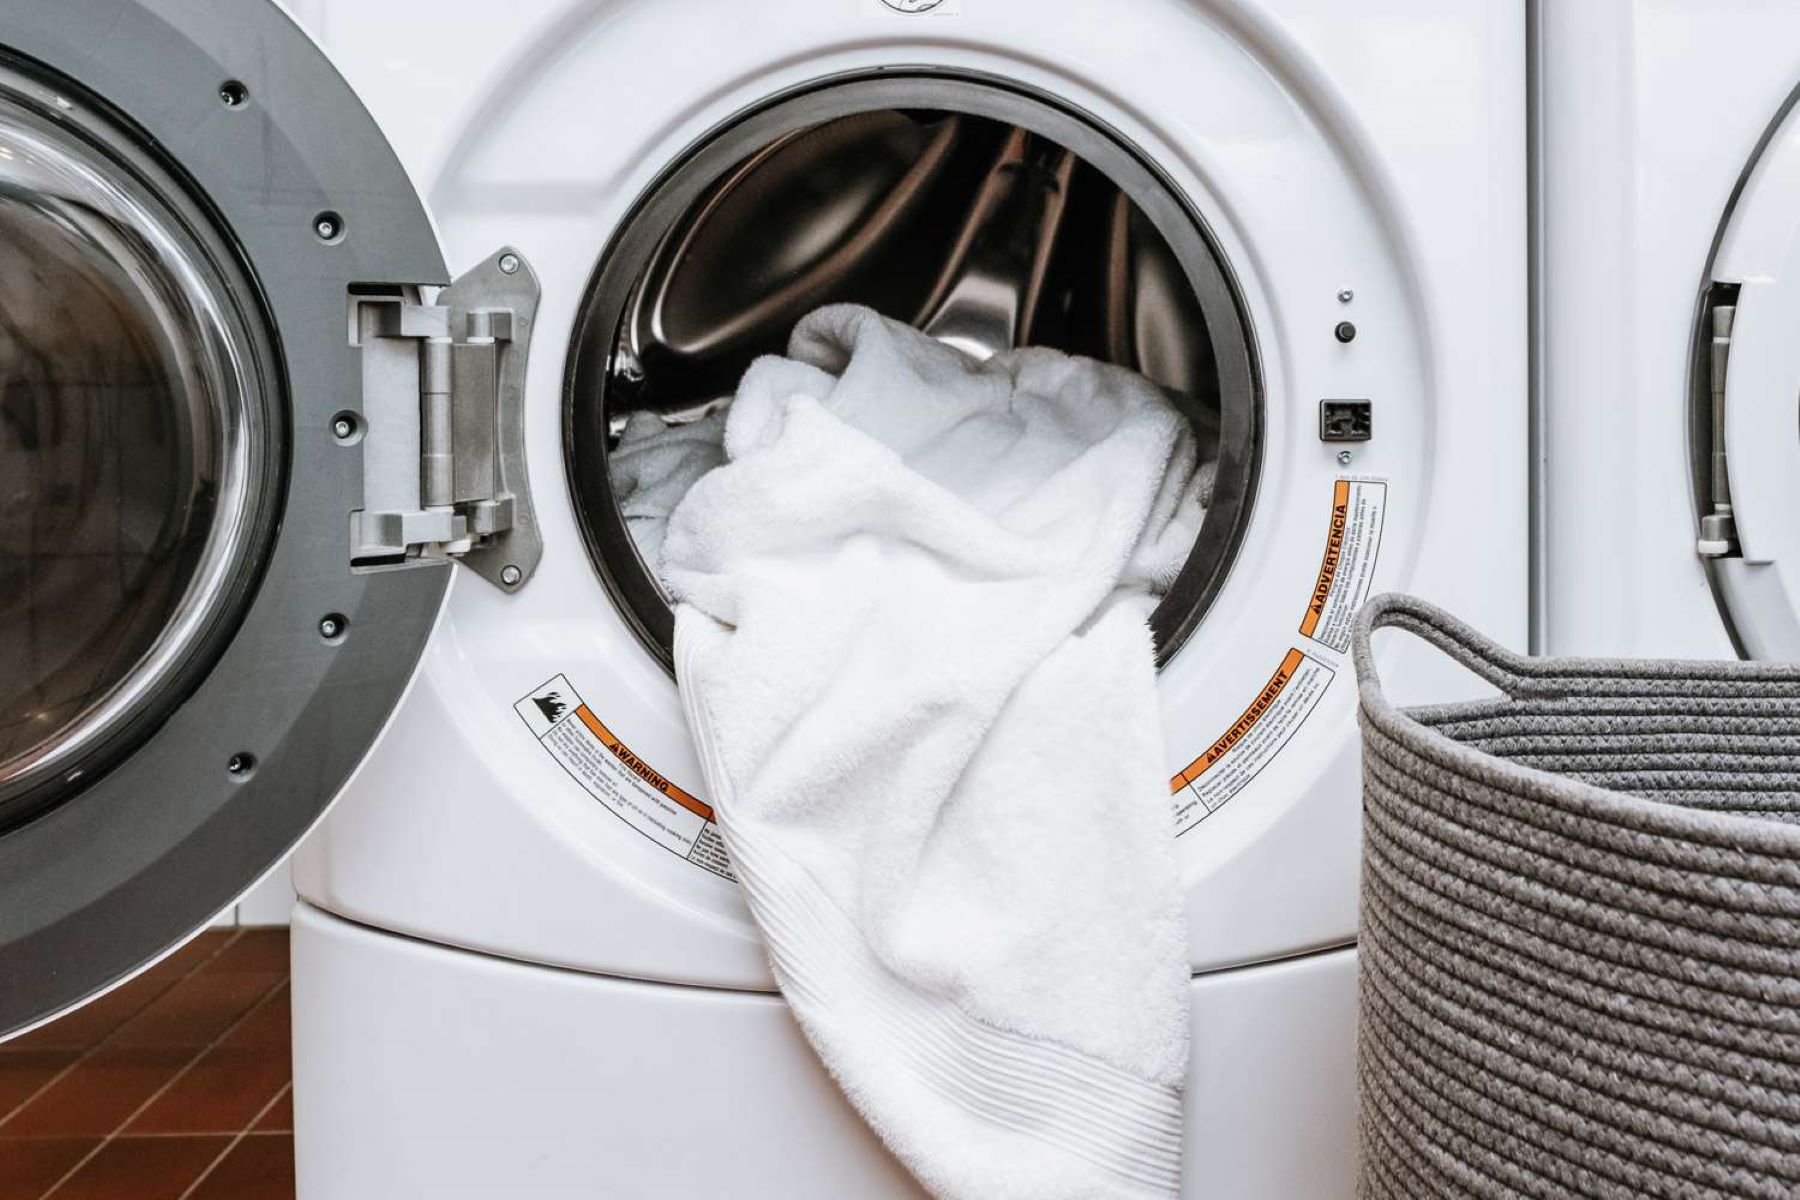 How To Fix The Error Code F31 For Whirlpool Dryer